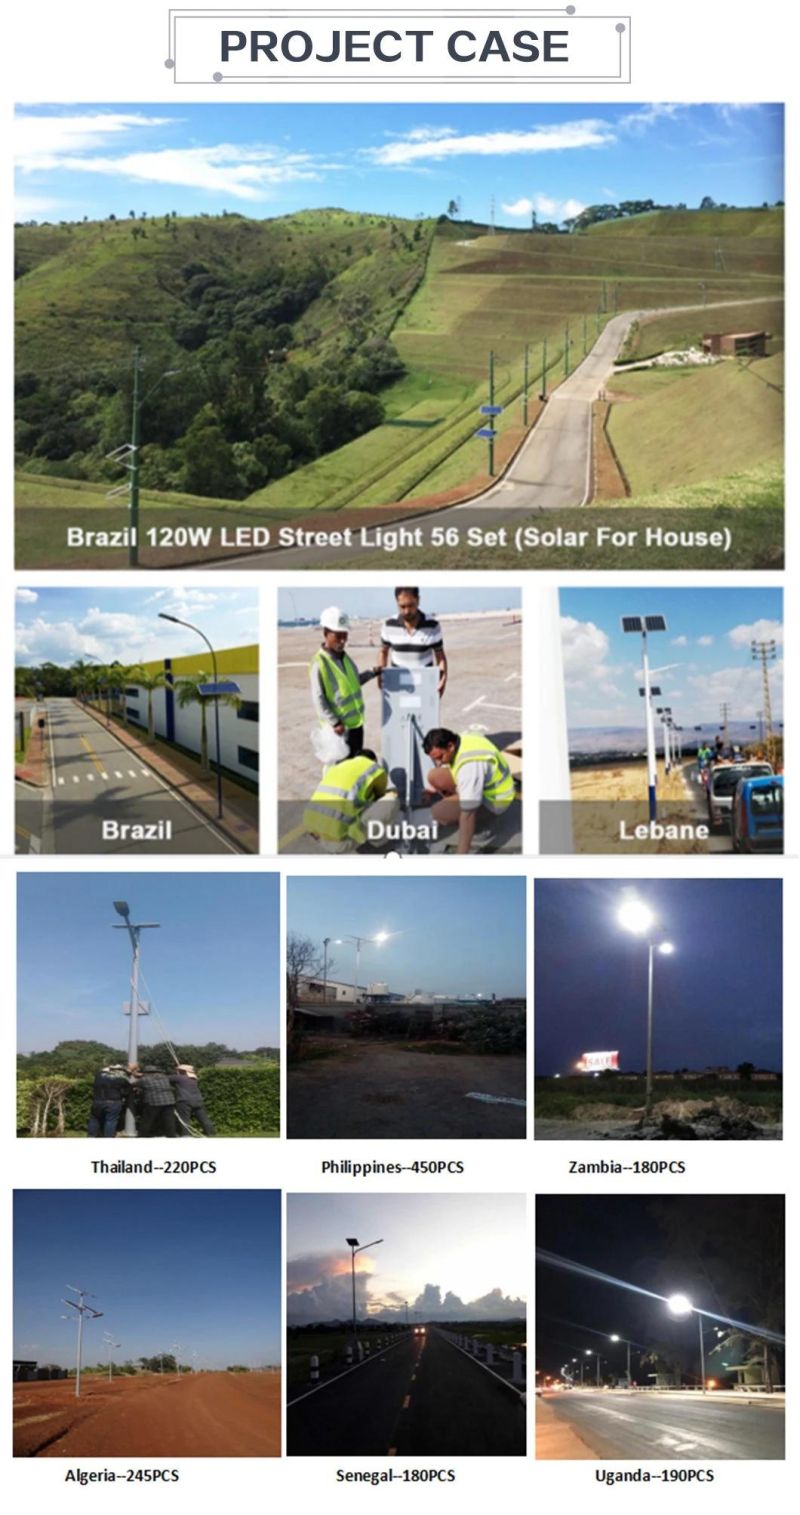 Factory Price High Power 80W Solar Street Light with 9 Meters Light Pole